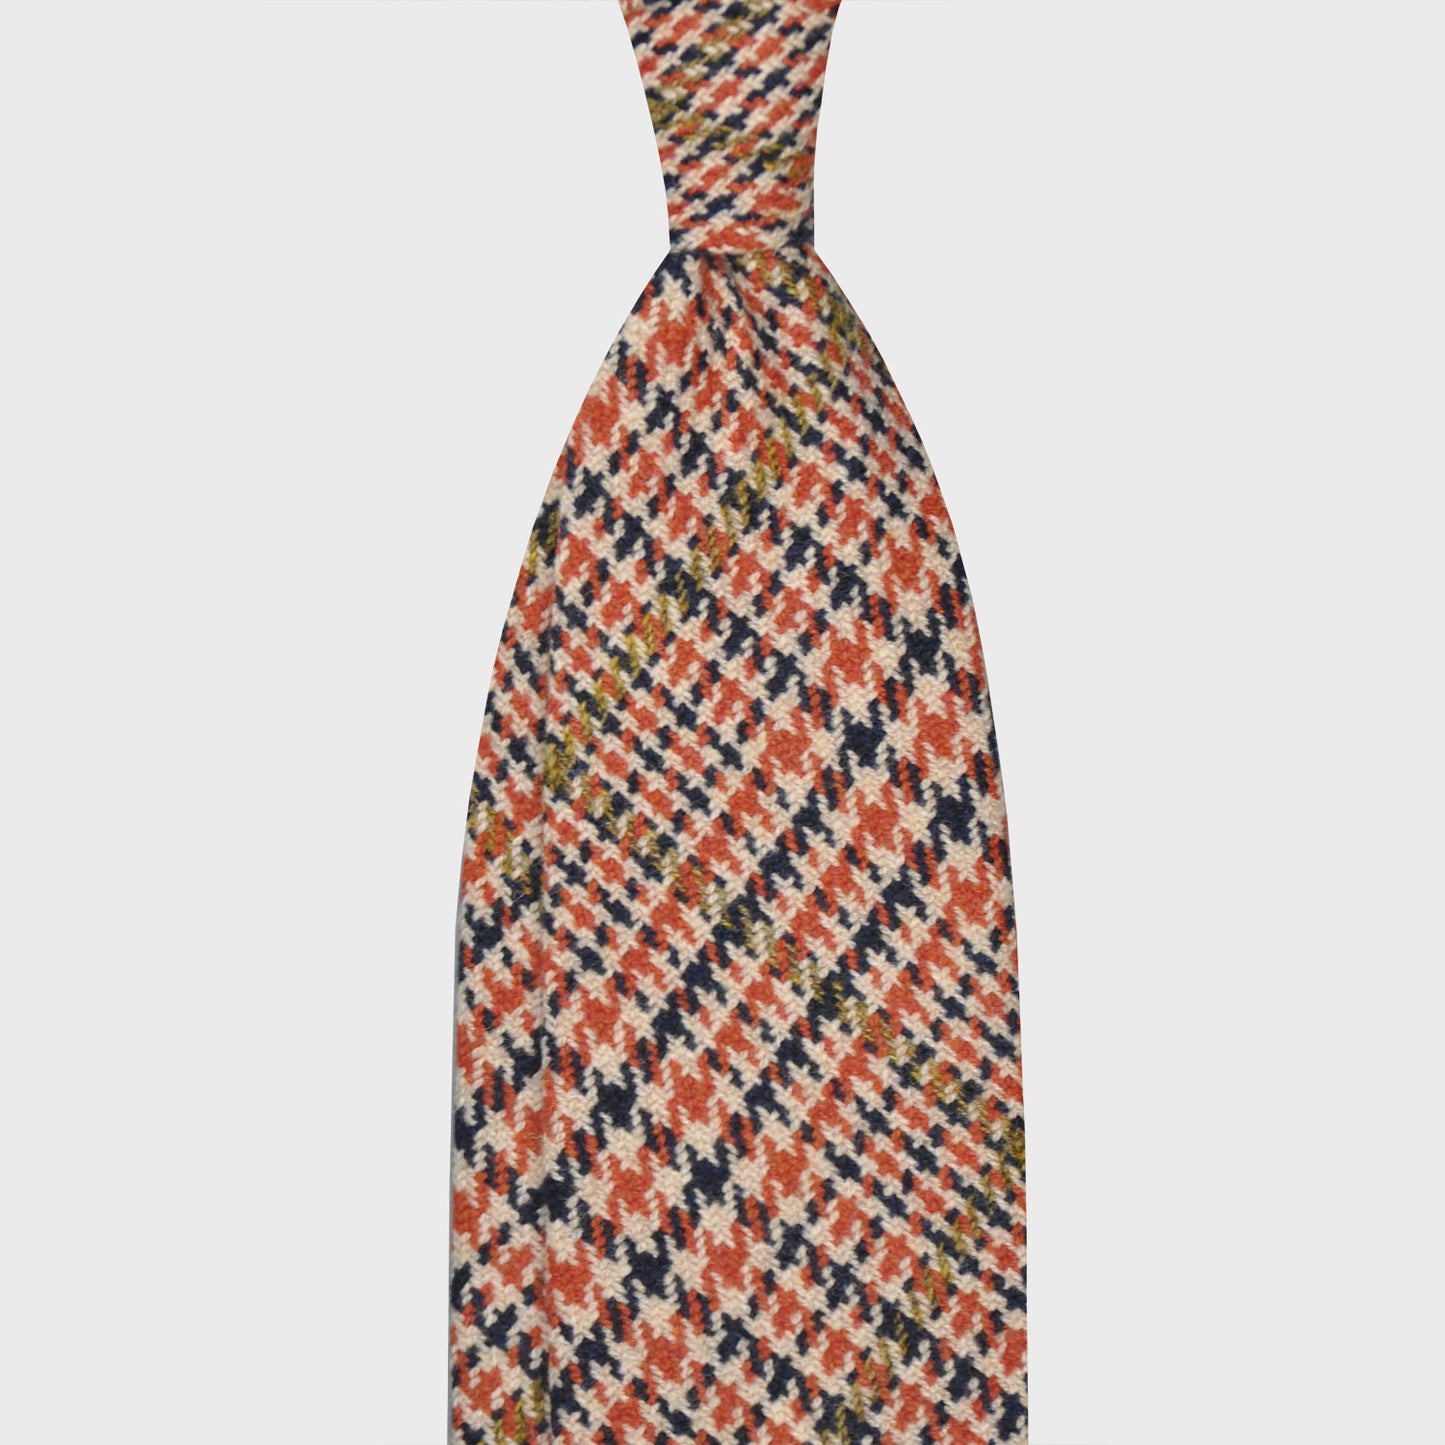 Orange Tweed Tie Handmade Unlined Houndstooth Pattern. Houndstooth tweed wool tie, F Marino ties for Wools Boutique Uomo, light tweed soft texture to the touch, 3 folds, orange, navy blue, olive green houndstooth pattern